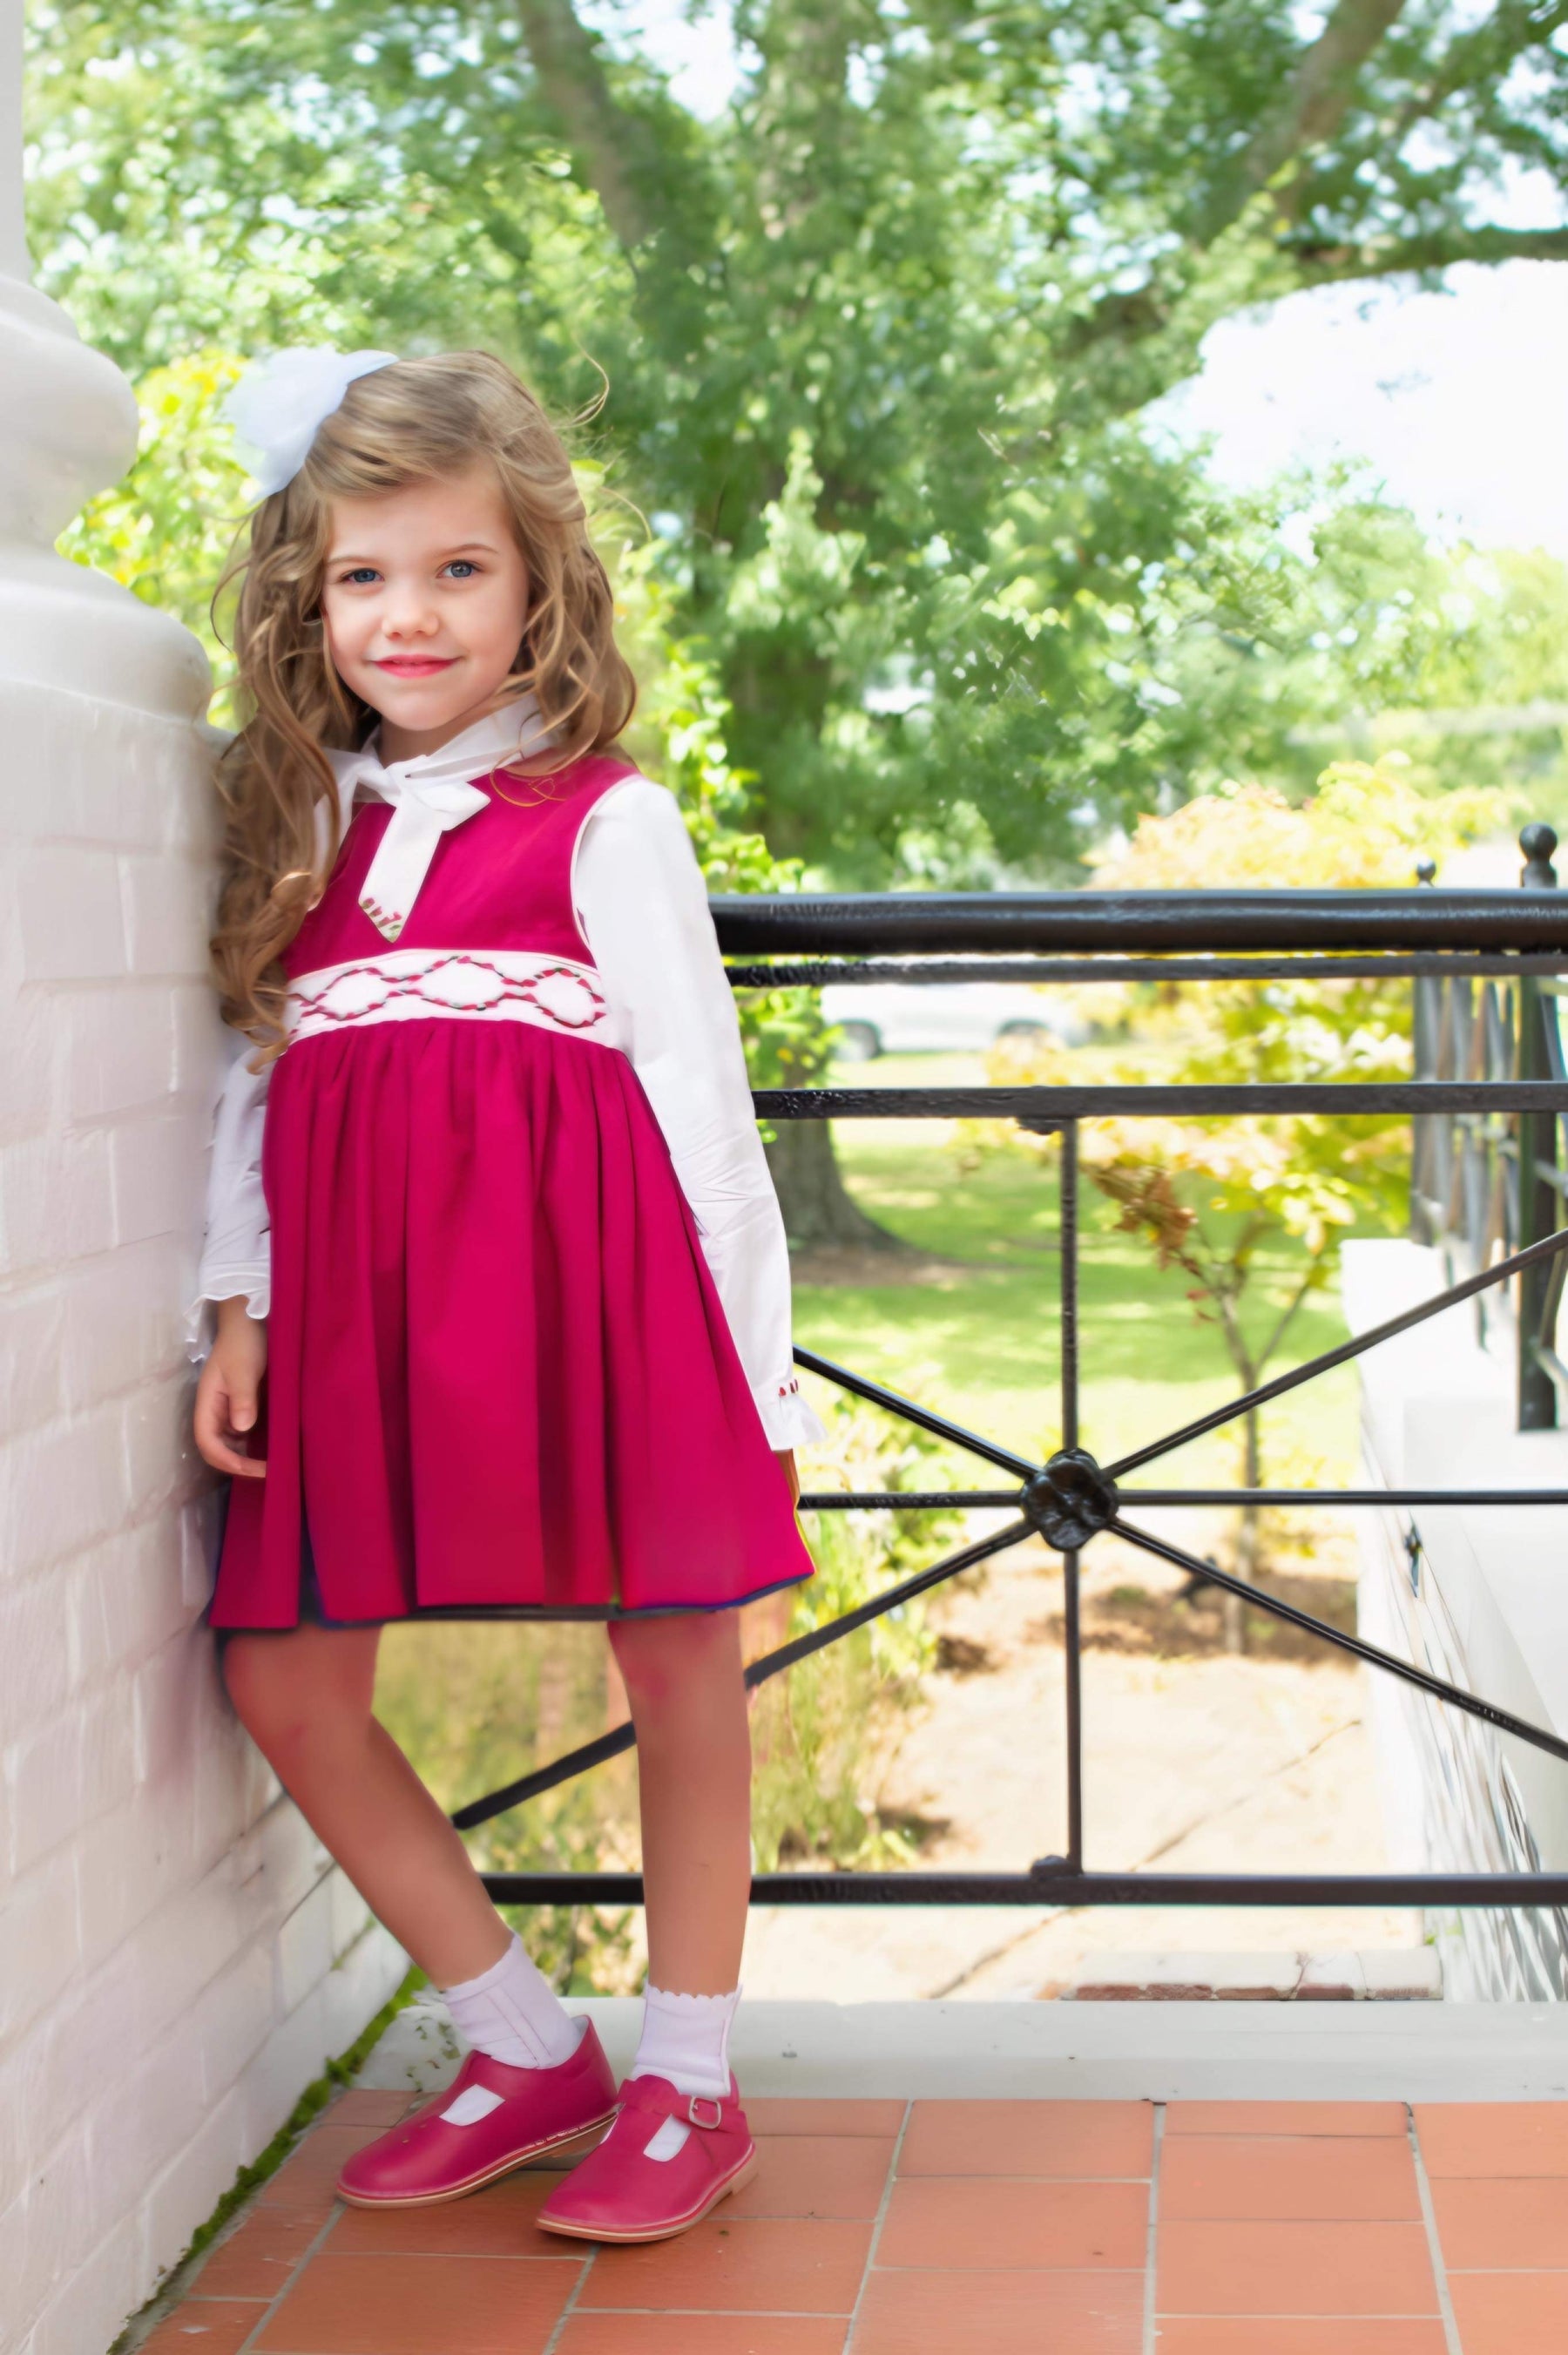 French style handmade traditional smocked dresses for babies and girls up  to 12 years old. A